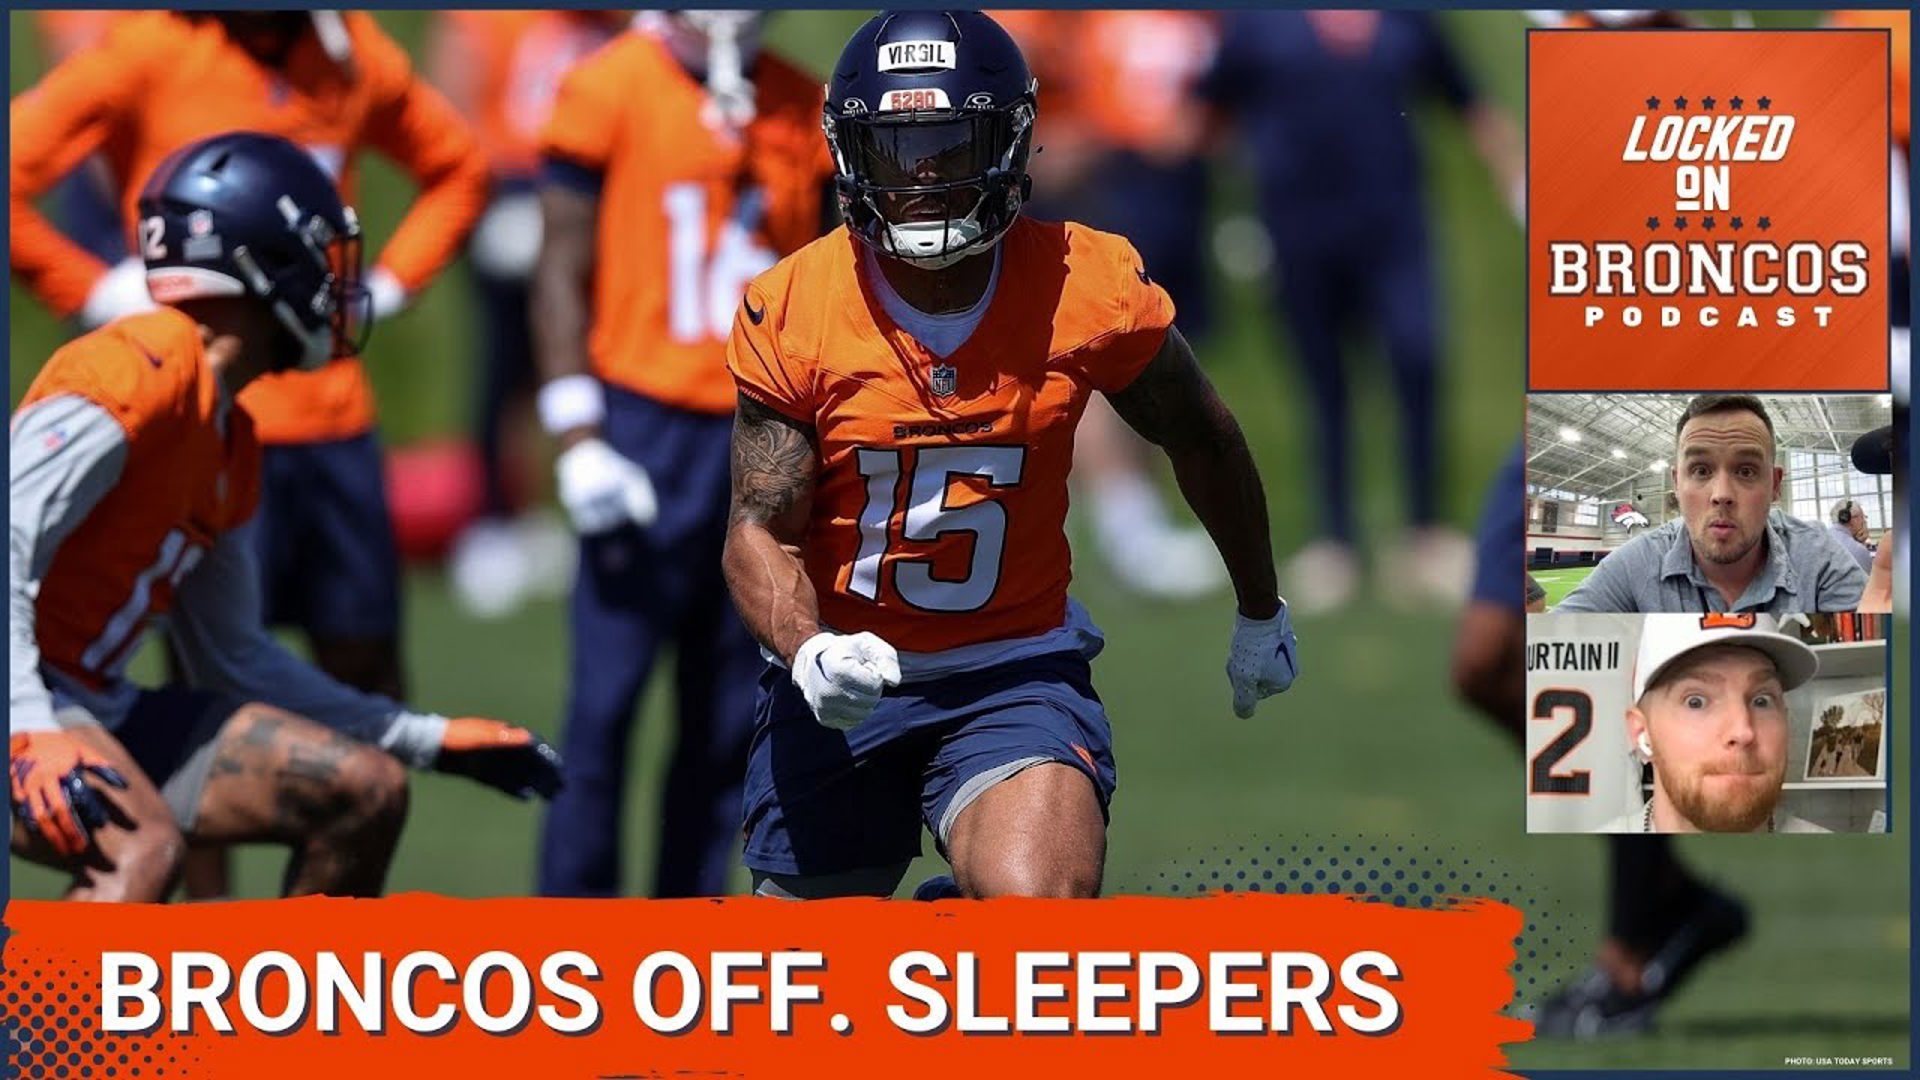 The Denver Broncos have had several young players stand out as under-the-radar options for the Broncos offense during the offseason program.